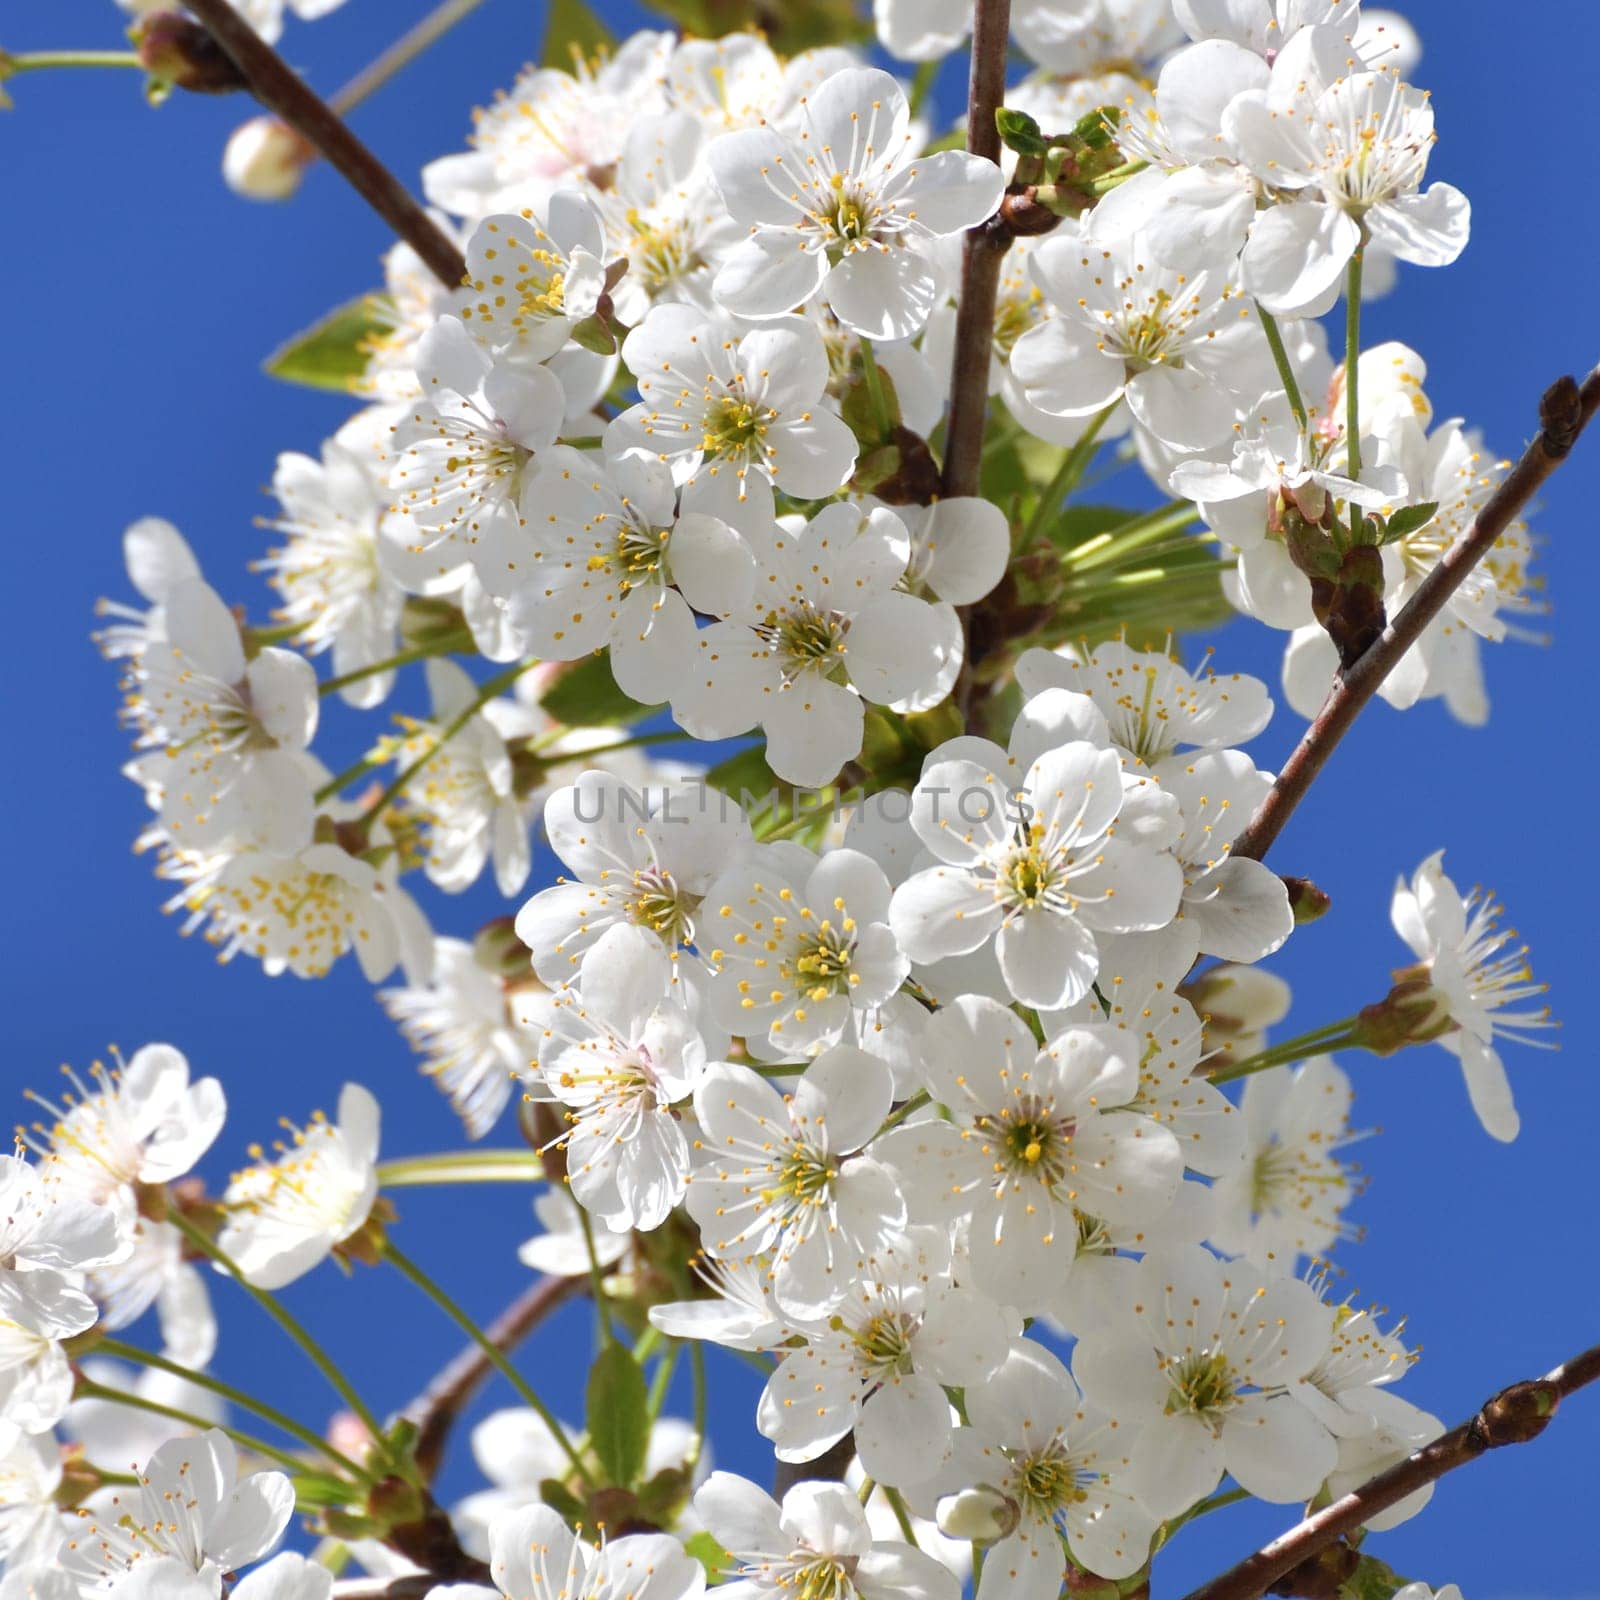 A sprig of white cherry blossoms against a blue sky by olgavolodina